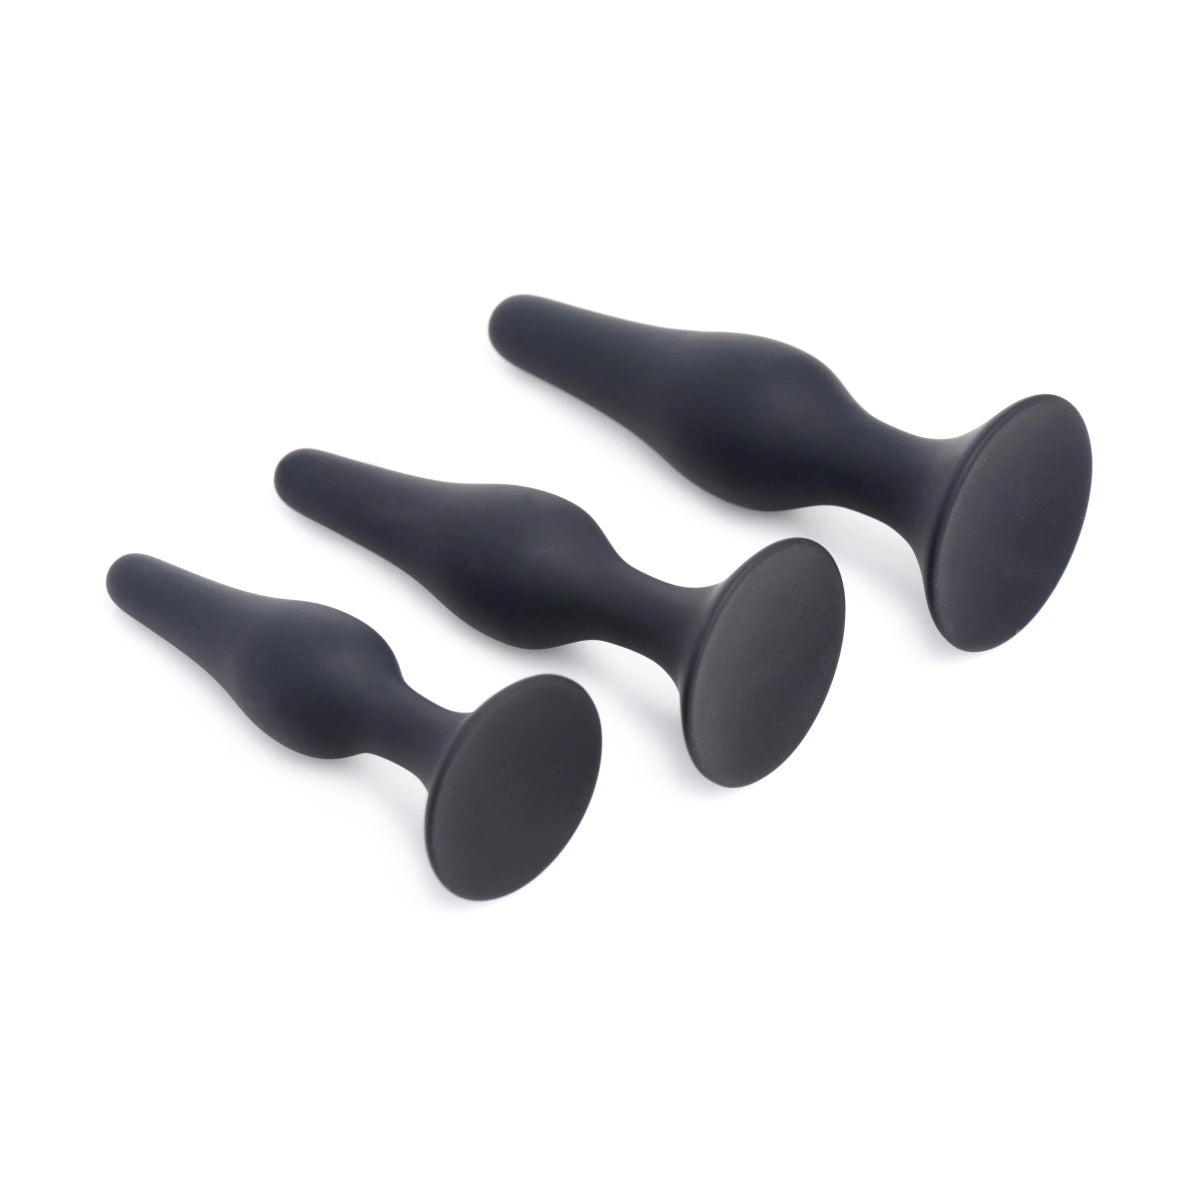 Master Series Triple Spire Tapered Silicone Anal Trainer Butt Plug Set Black